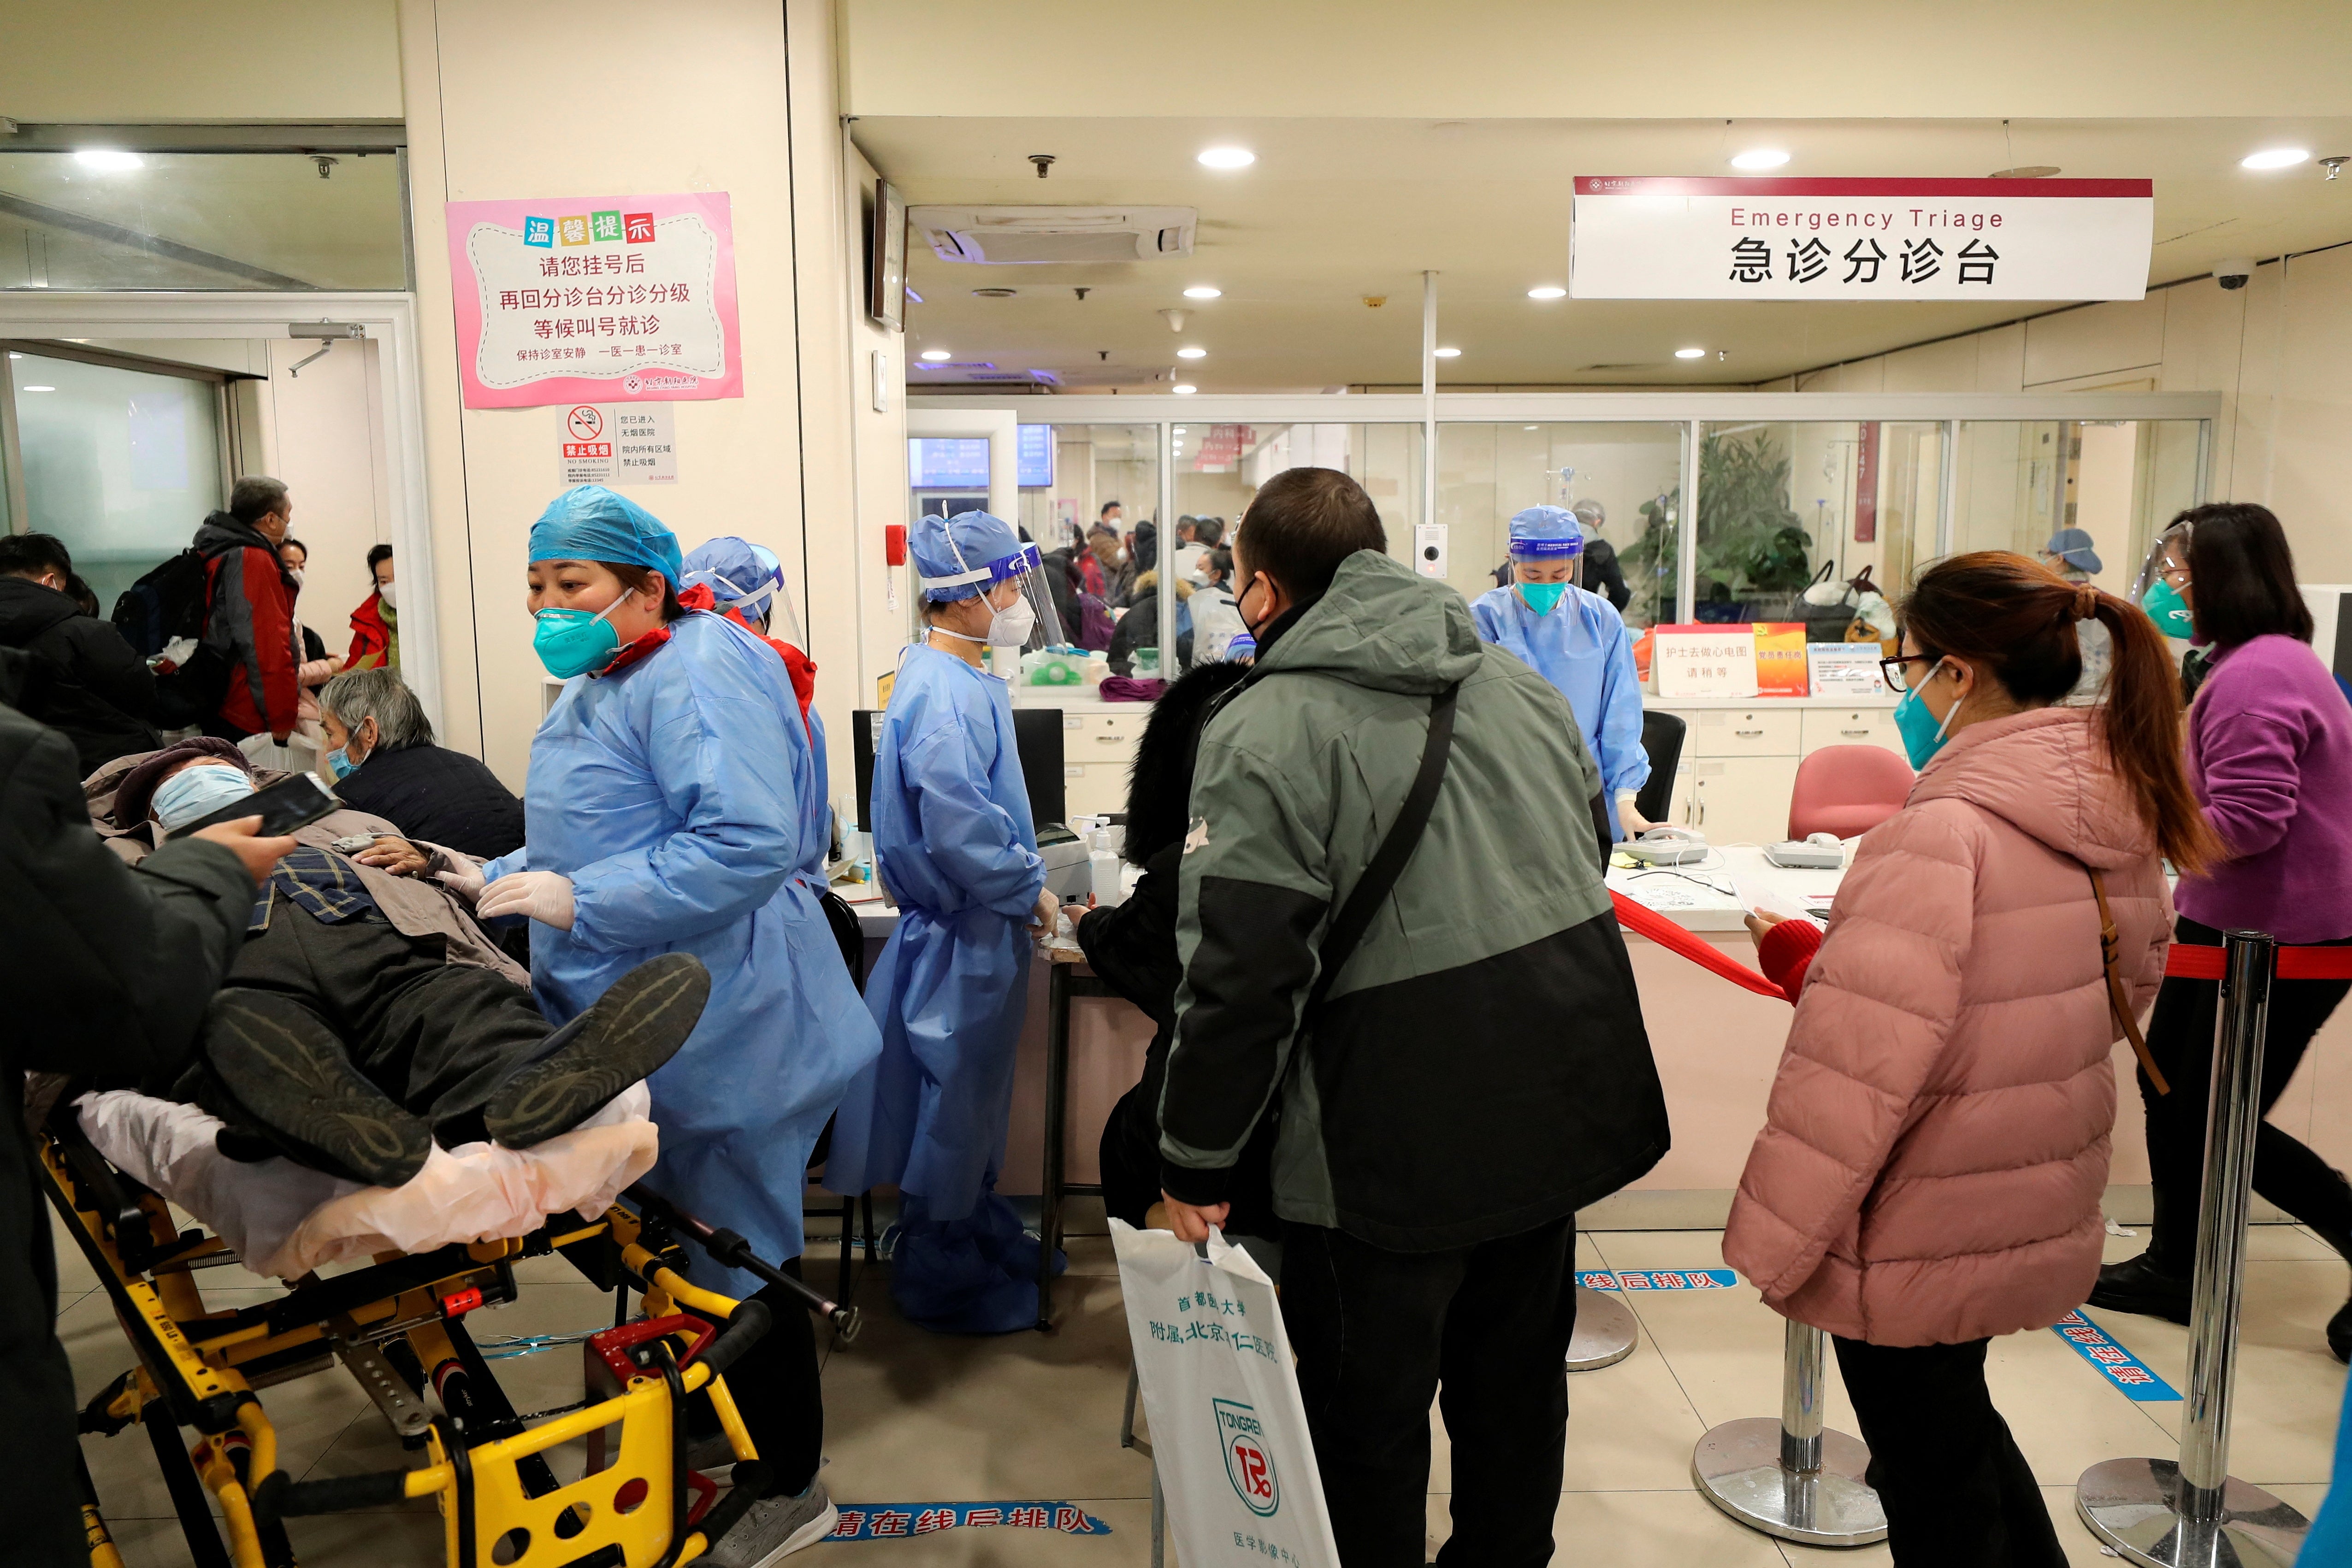 COVID in Beijing ‘peaks’ as hospitals, funeral homes fill up